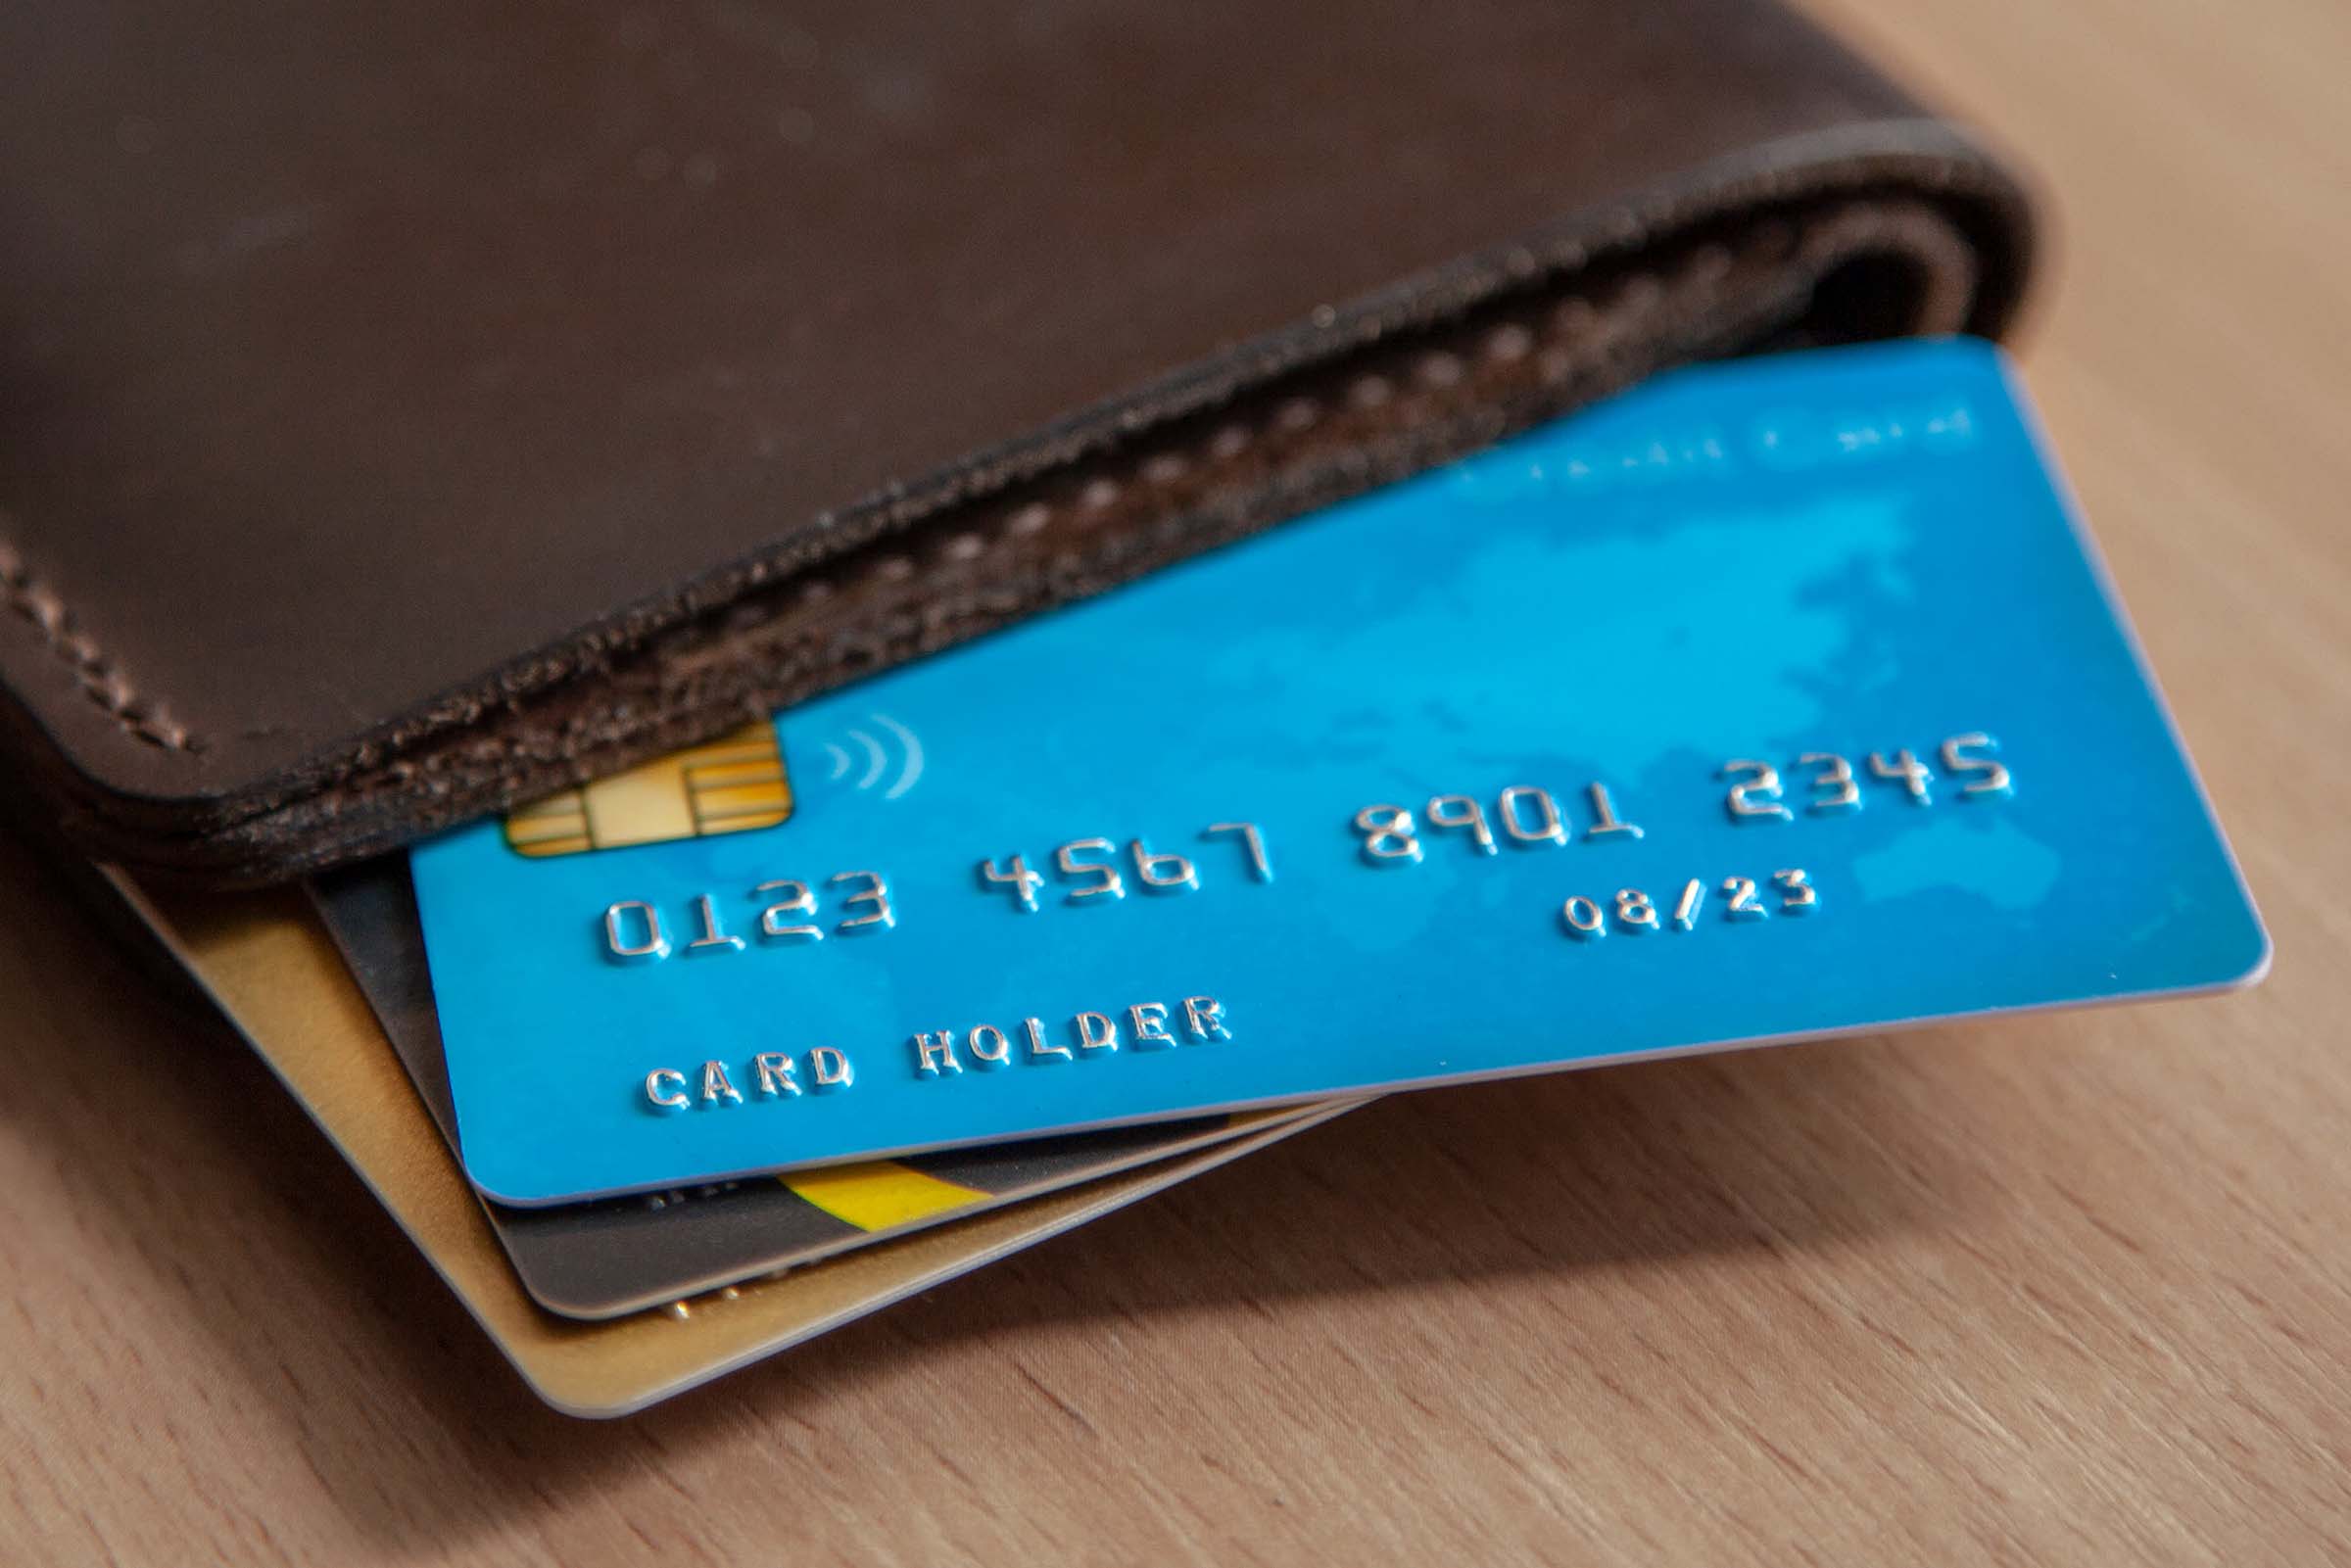 Nowadays many businesses are entirely online and simply cannot take cash. Check out this list of the four best benefits of getting a credit card!